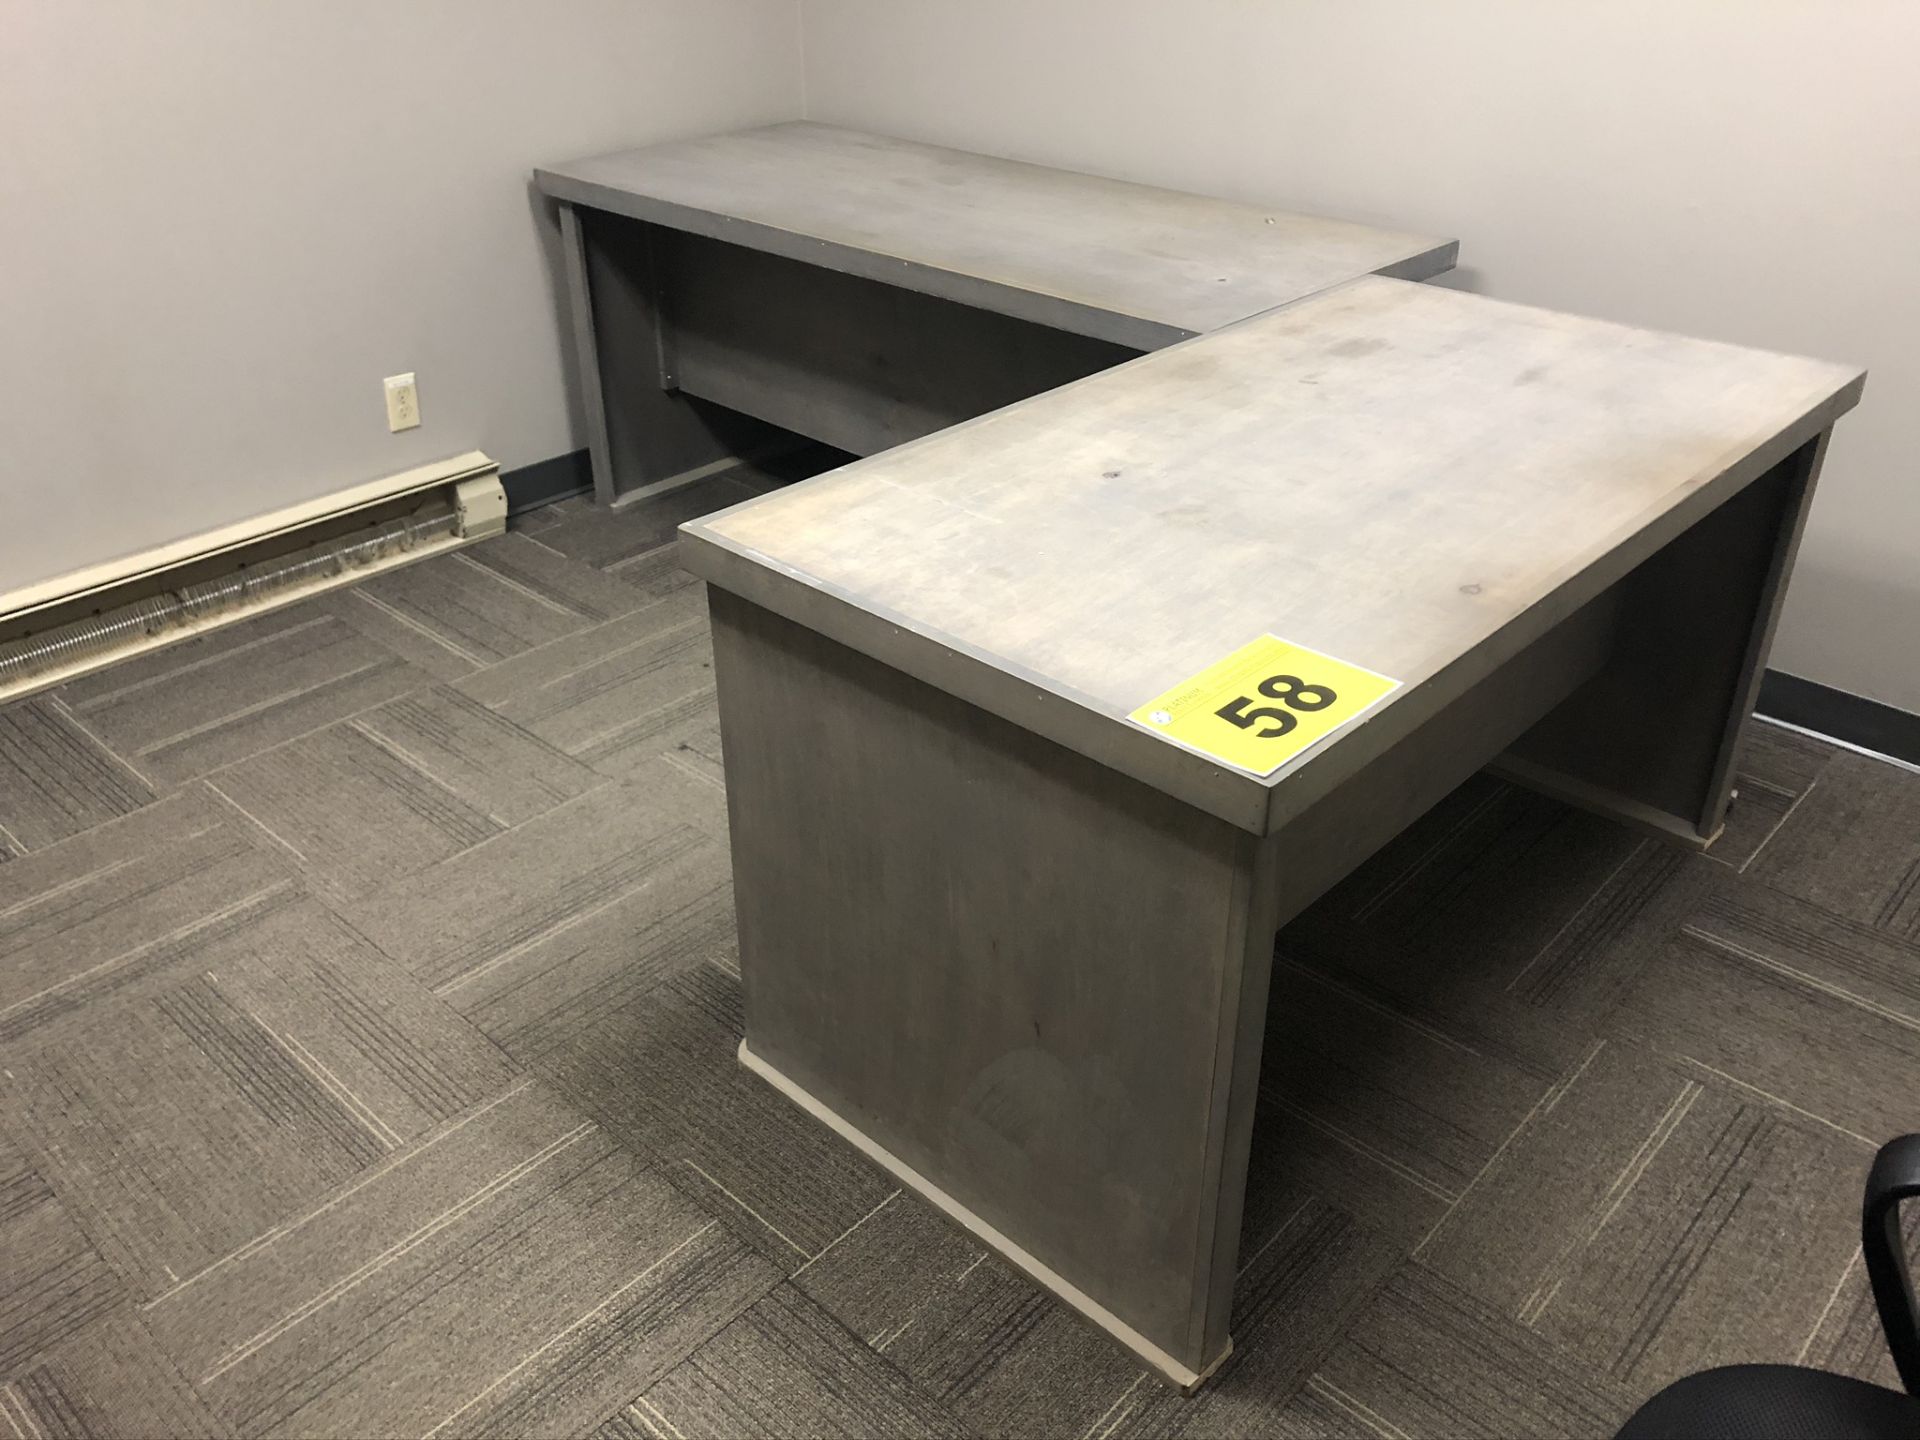 GRAY, L-SHAPED OFFICE DESK WITH DRAFTING TABLE, BOOKSHELF AND SITE PLANT FOLDER